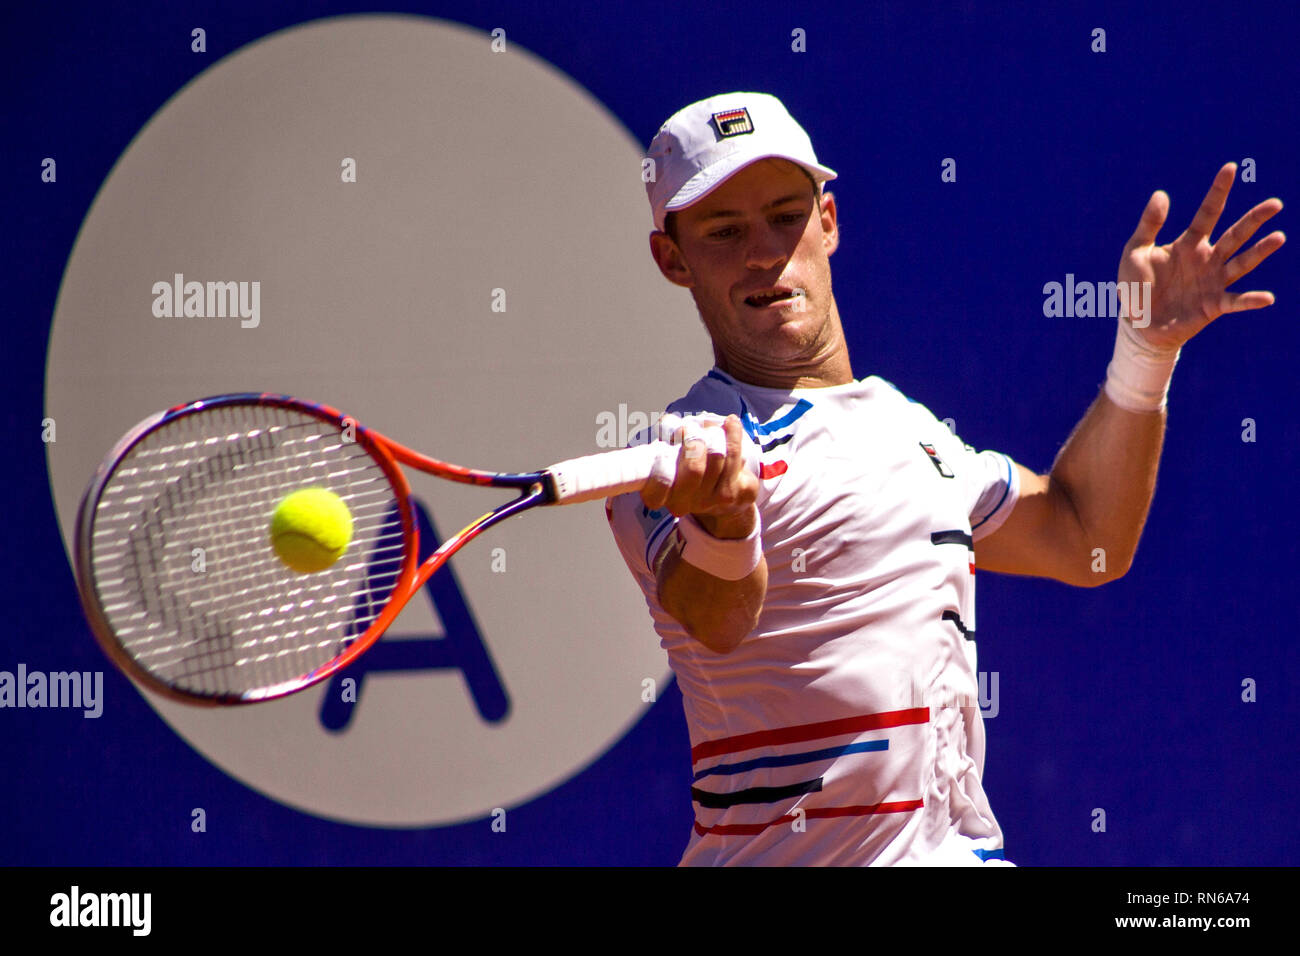 Buenos Aires, Federal Capital, Argentina. 17th Feb, 2019. Marco Cecchinato is the Champion of the ATP 250 of the Argentina Open 2019 after winning in two straight sets 6-1; 6-2 to the Argentinian Diego Swartzman. Credit: Roberto Almeida Aveledo/ZUMA Wire/Alamy Live News Stock Photo